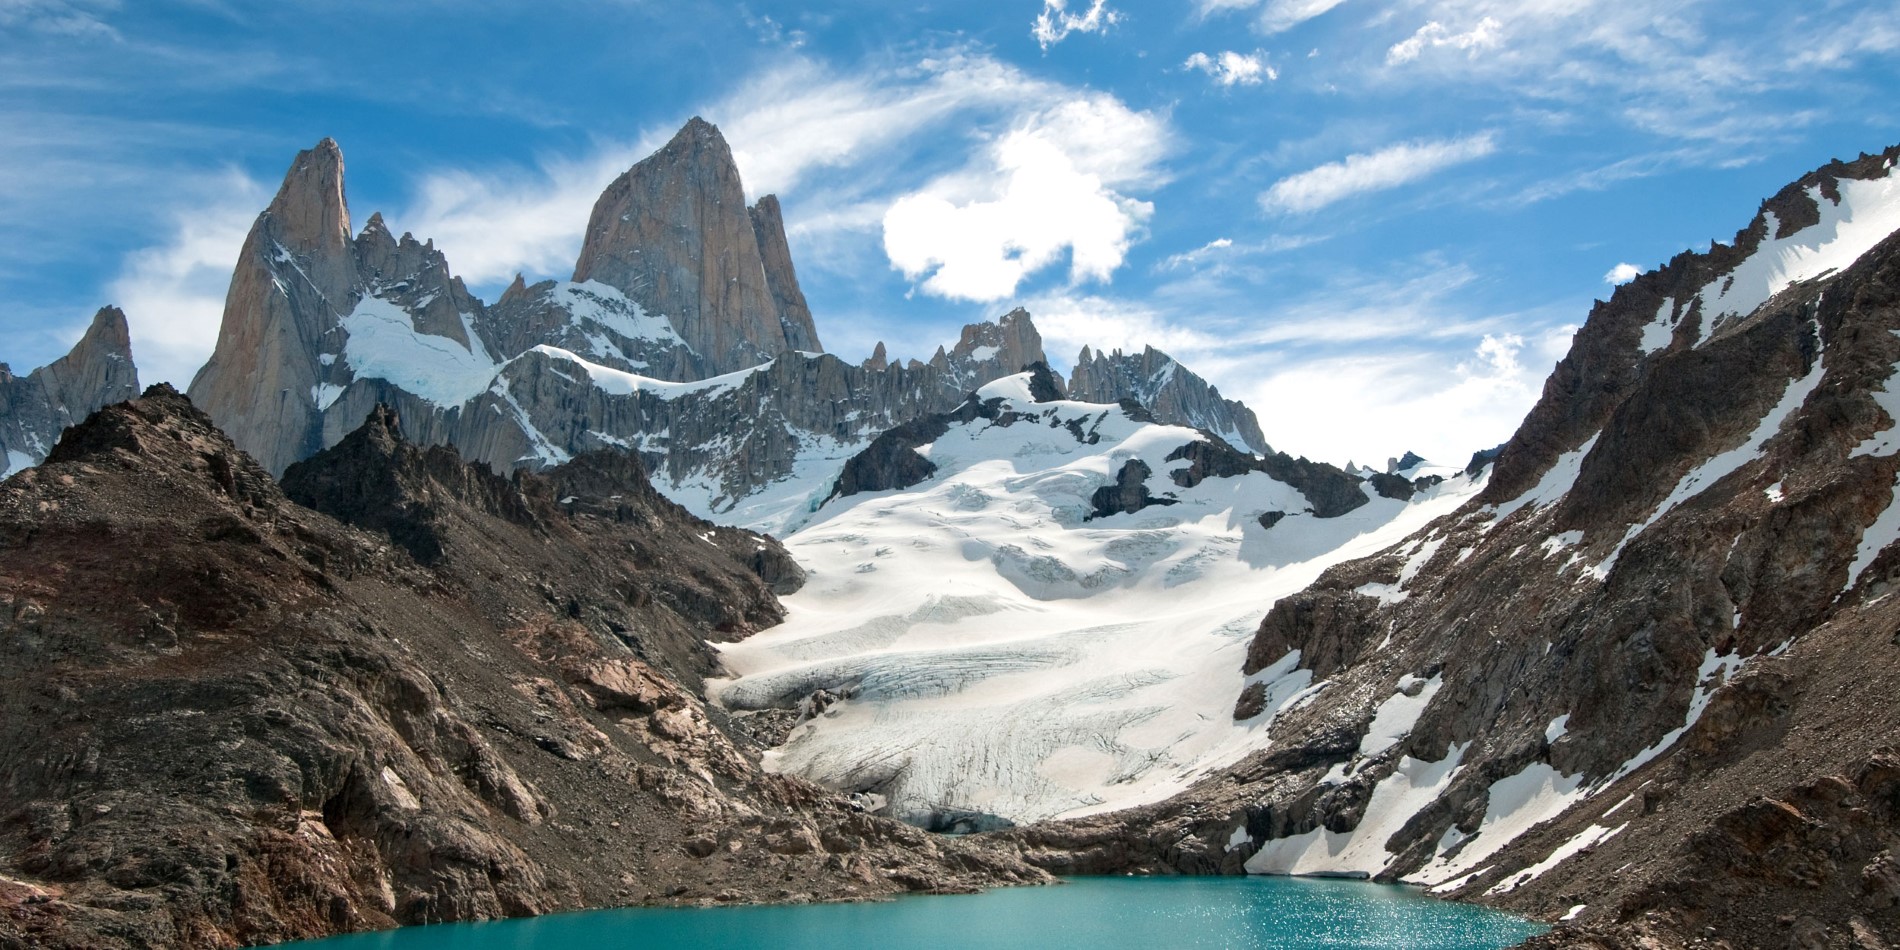 Monte Fitz Roy is located near El Chaltén village on the border between Argentina and Chile